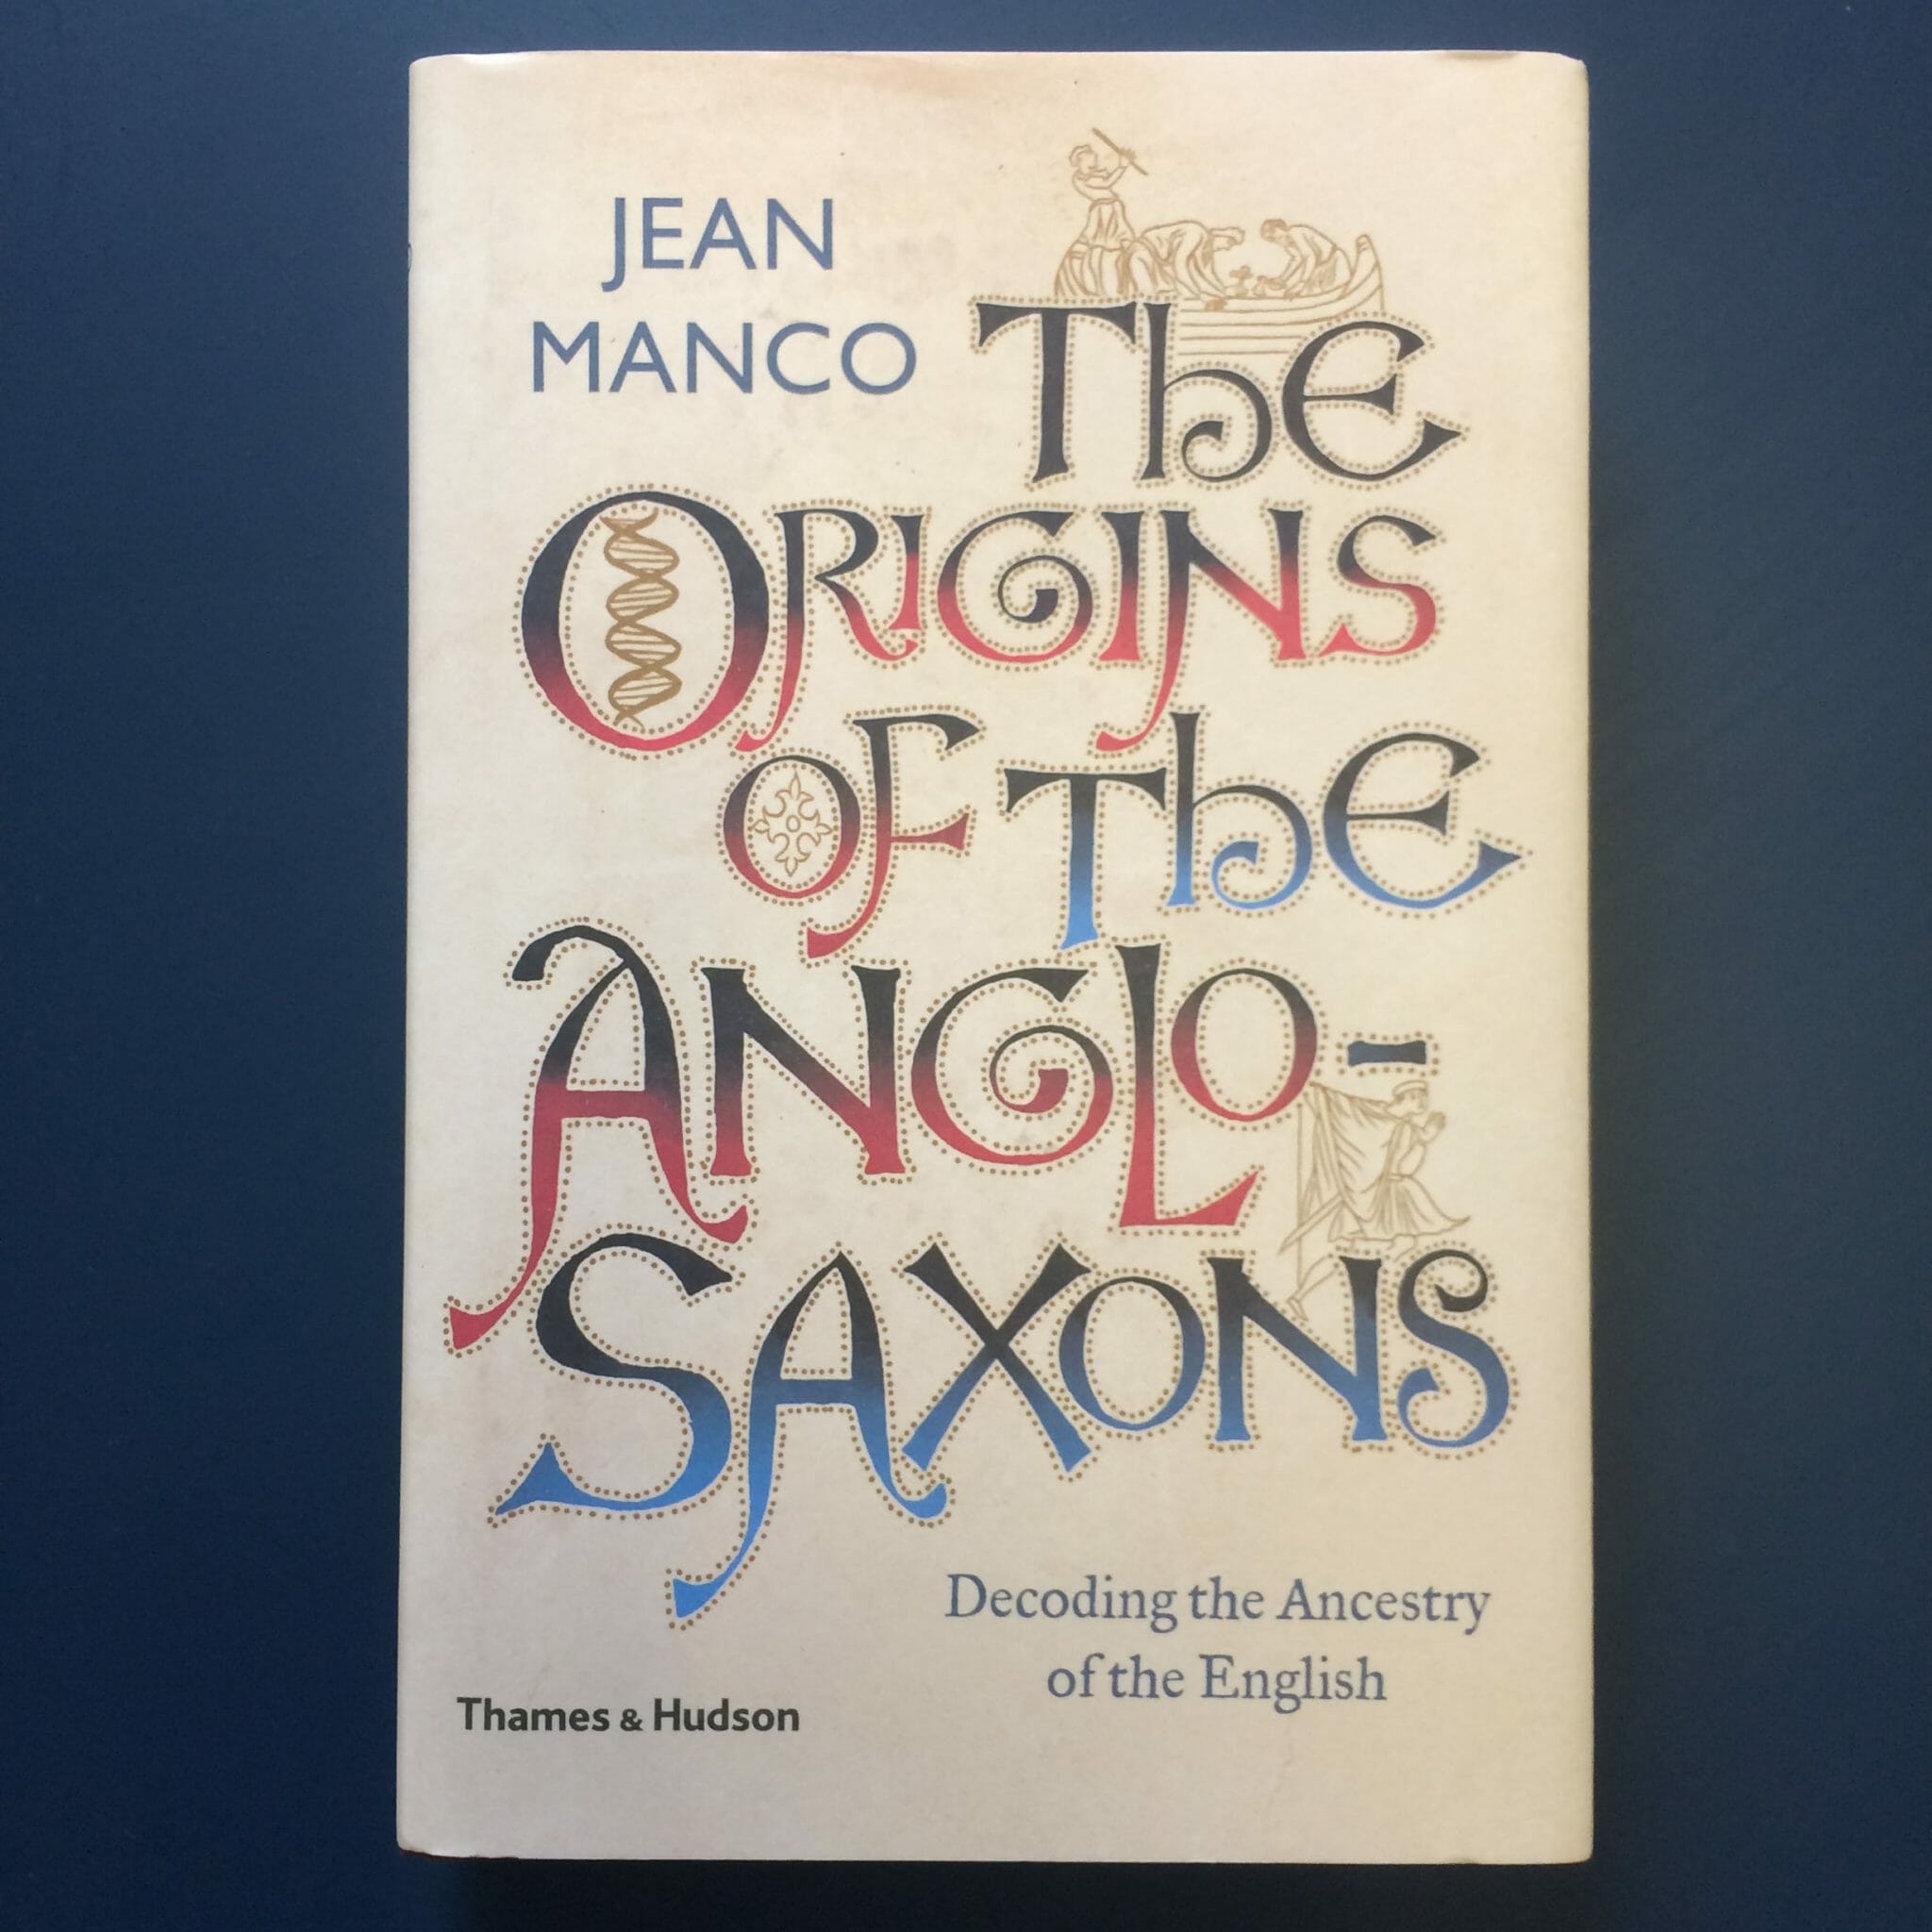 Jean Manco – The Origins of the Anglo-Saxons